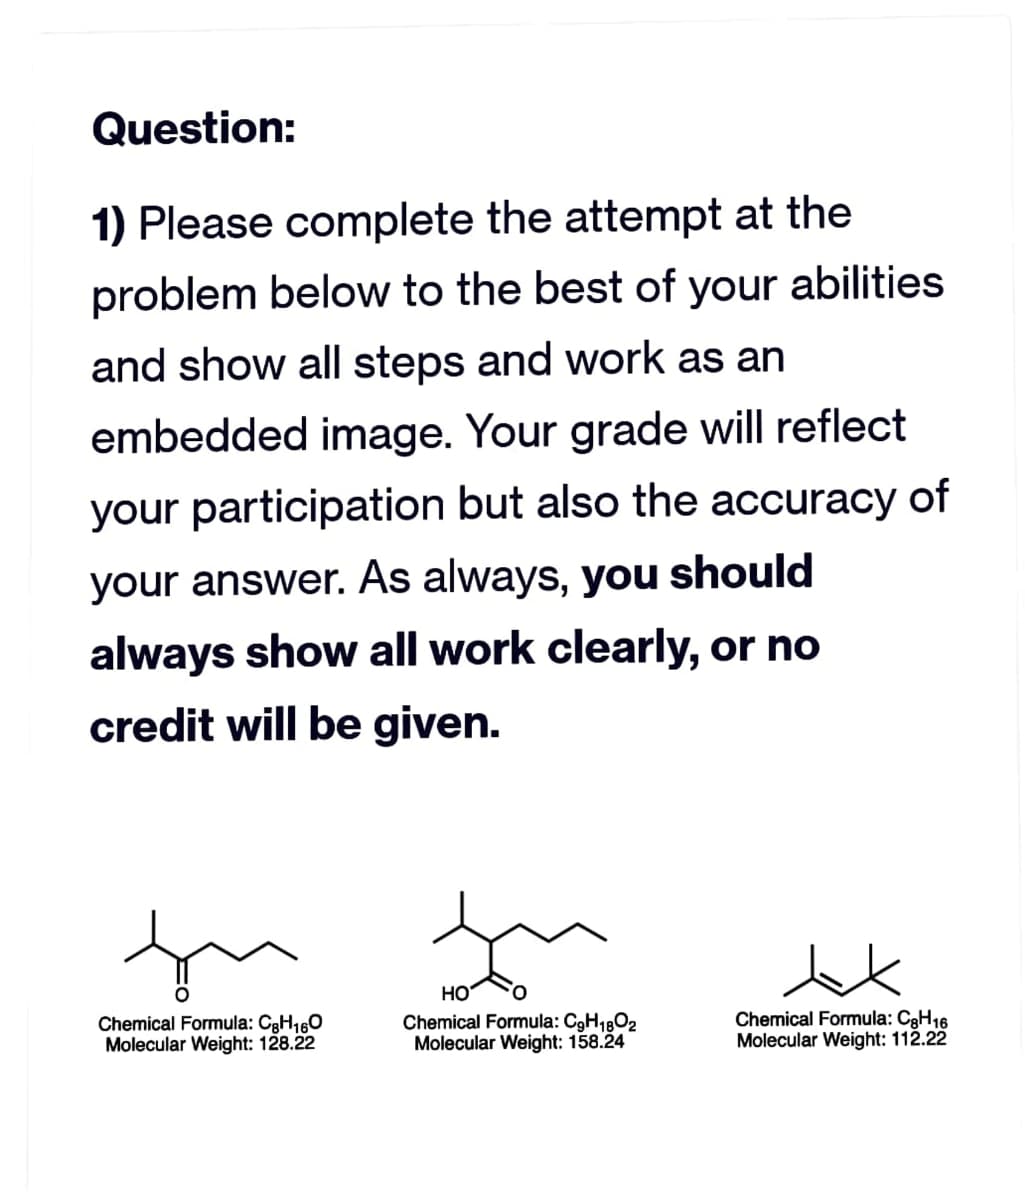 Question:
1) Please complete the attempt at the
problem below to the best of your abilities
and show all steps and work as an
embedded image. Your grade will reflect
your participation but also the accuracy of
your answer. As always, you should
always show all work clearly, or no
credit will be given.
fu
Chemical Formula: C₂H160
Molecular Weight: 128.22
HO
Chemical Formula: C9H1802
Molecular Weight: 158.24
Chemical Formula: C8H16
Molecular Weight: 112.22